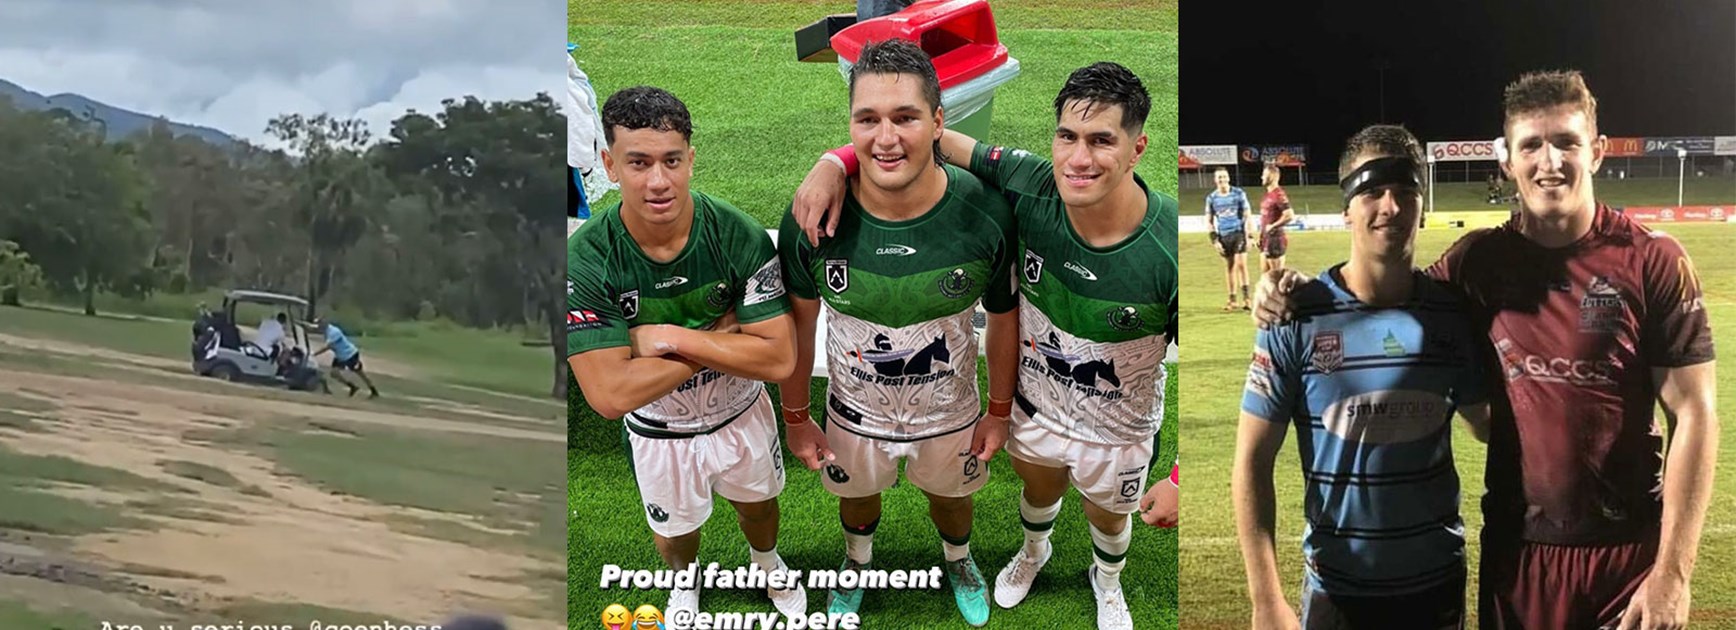 Cowboys on social: "Proud father moment"